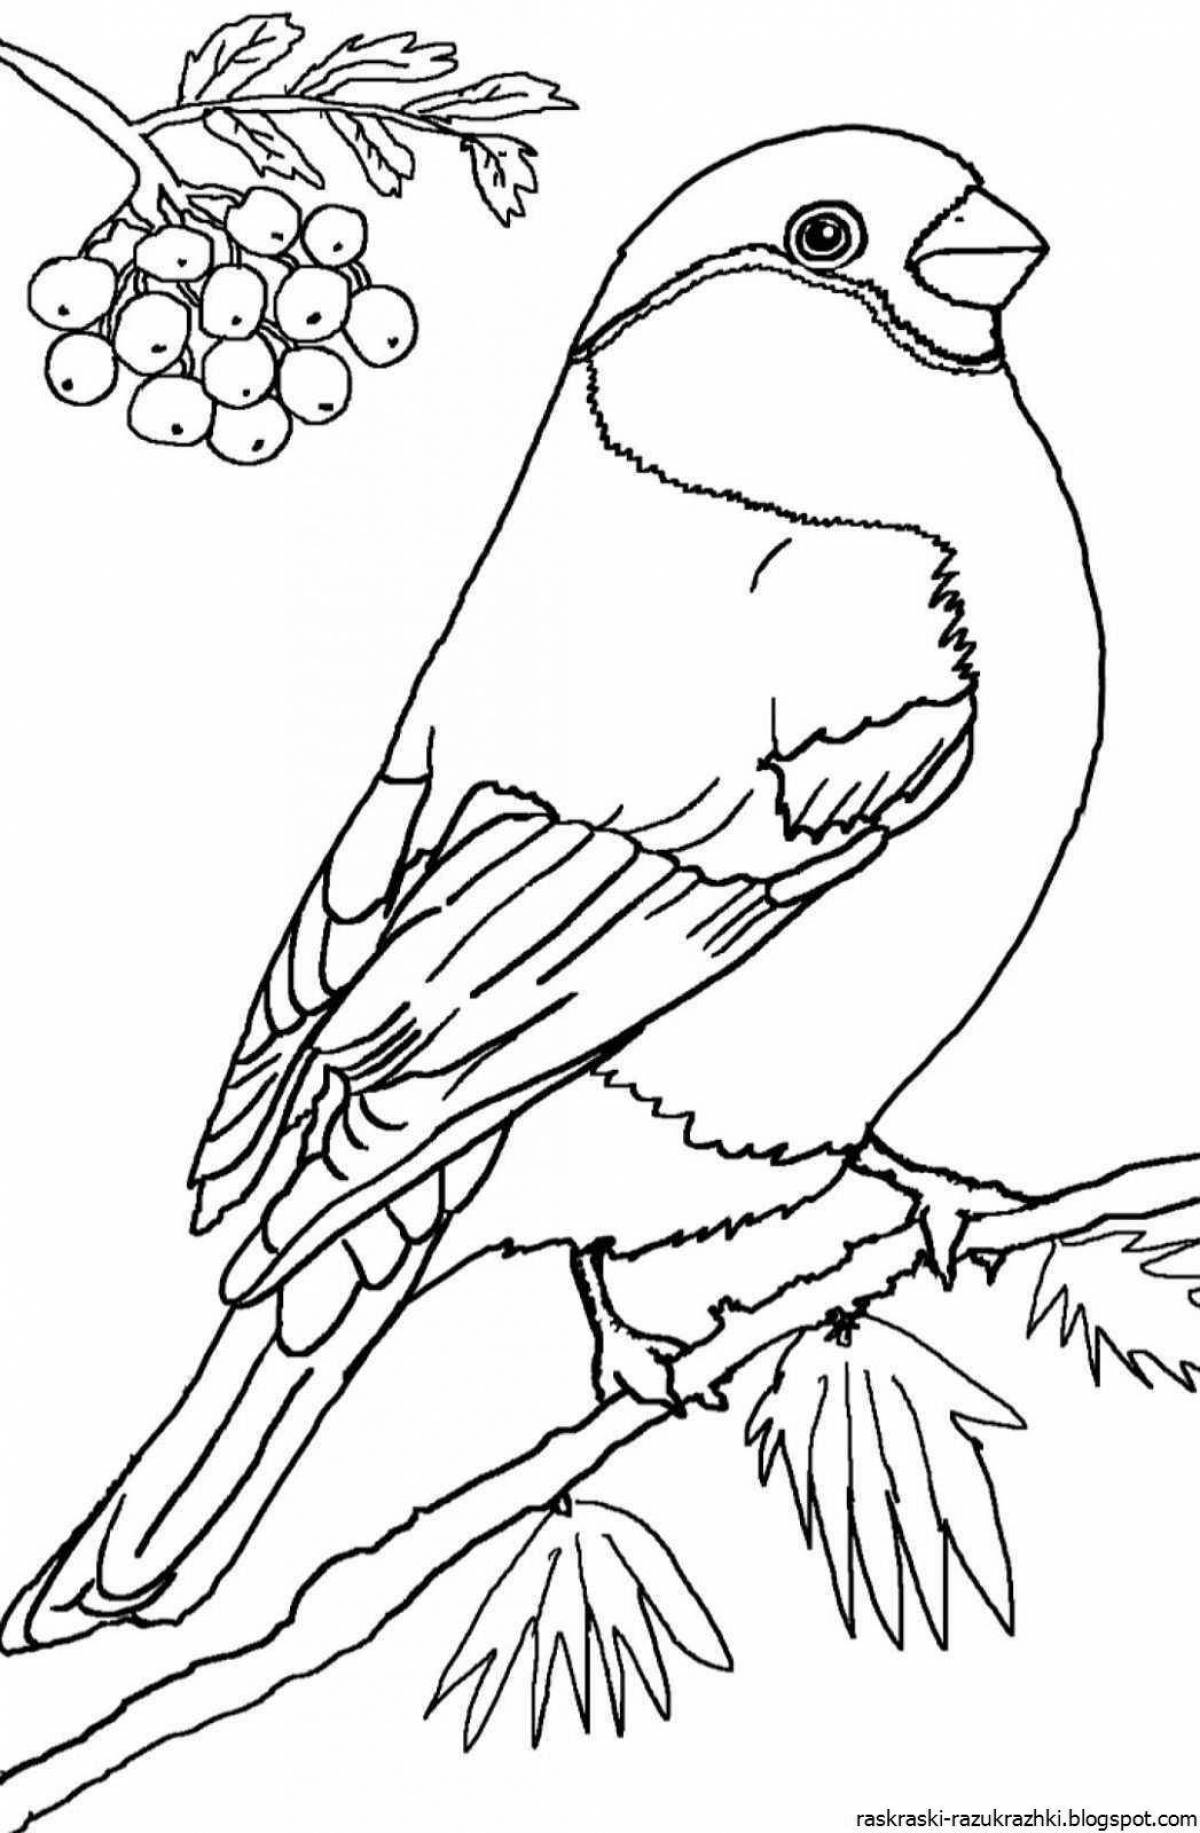 Coloring fairytale bullfinch and titmouse